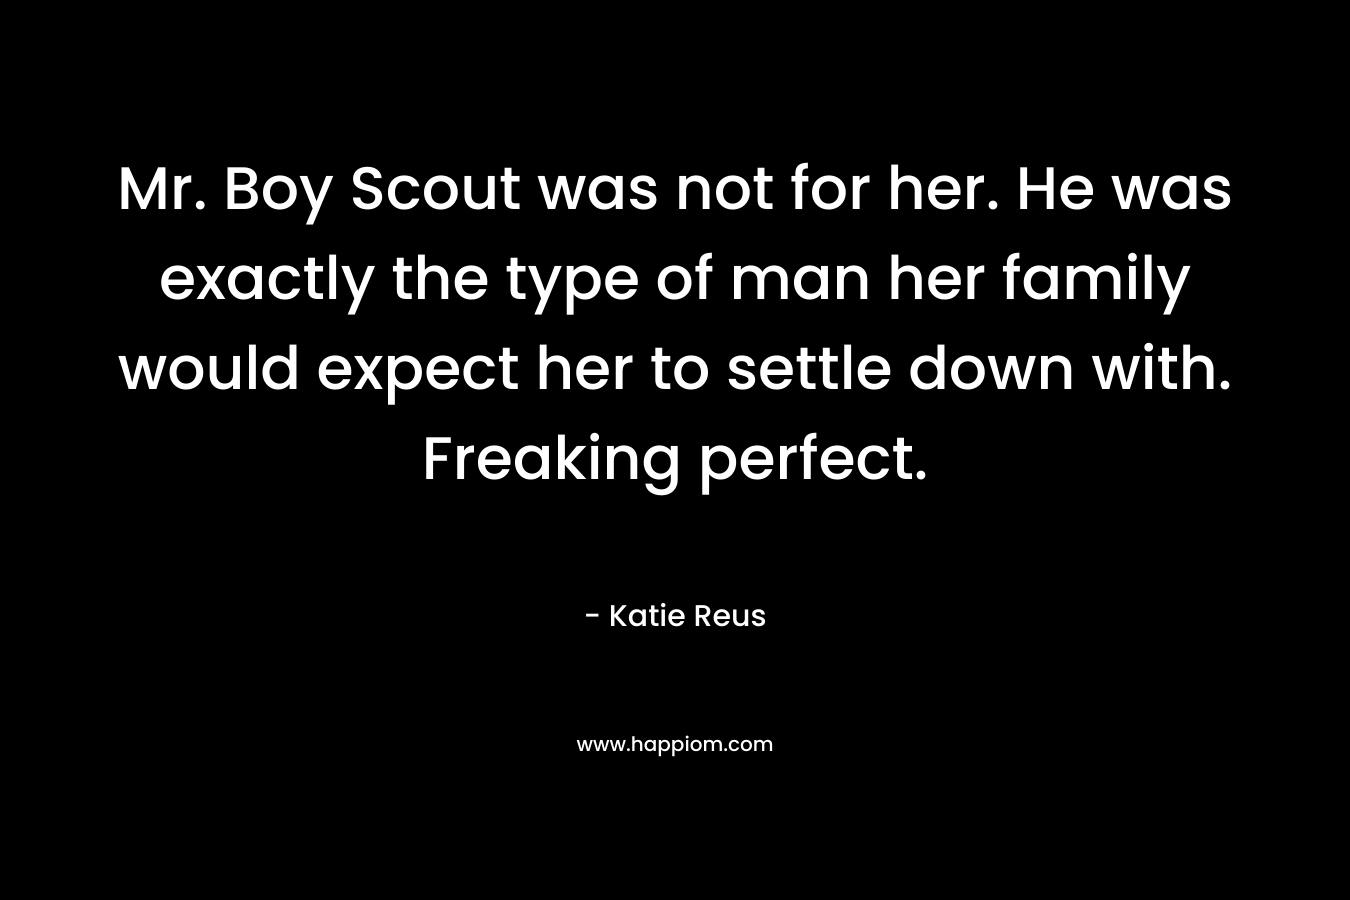 Mr. Boy Scout was not for her. He was exactly the type of man her family would expect her to settle down with. Freaking perfect.